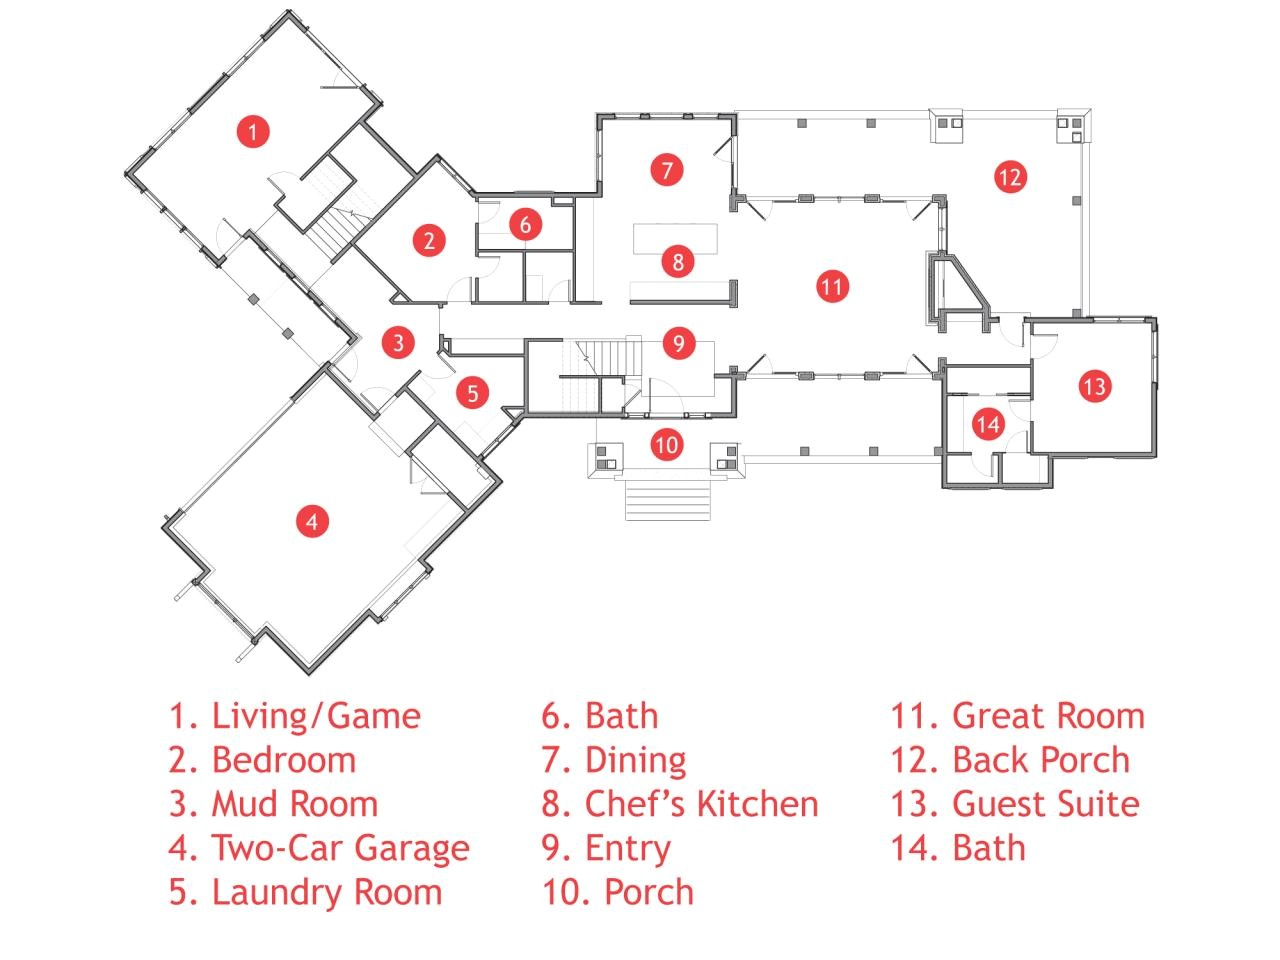 Hgtv Dream Home14 Floor Plan Floor Plan for Hgtv Dream Home 2012 Pictures and Video